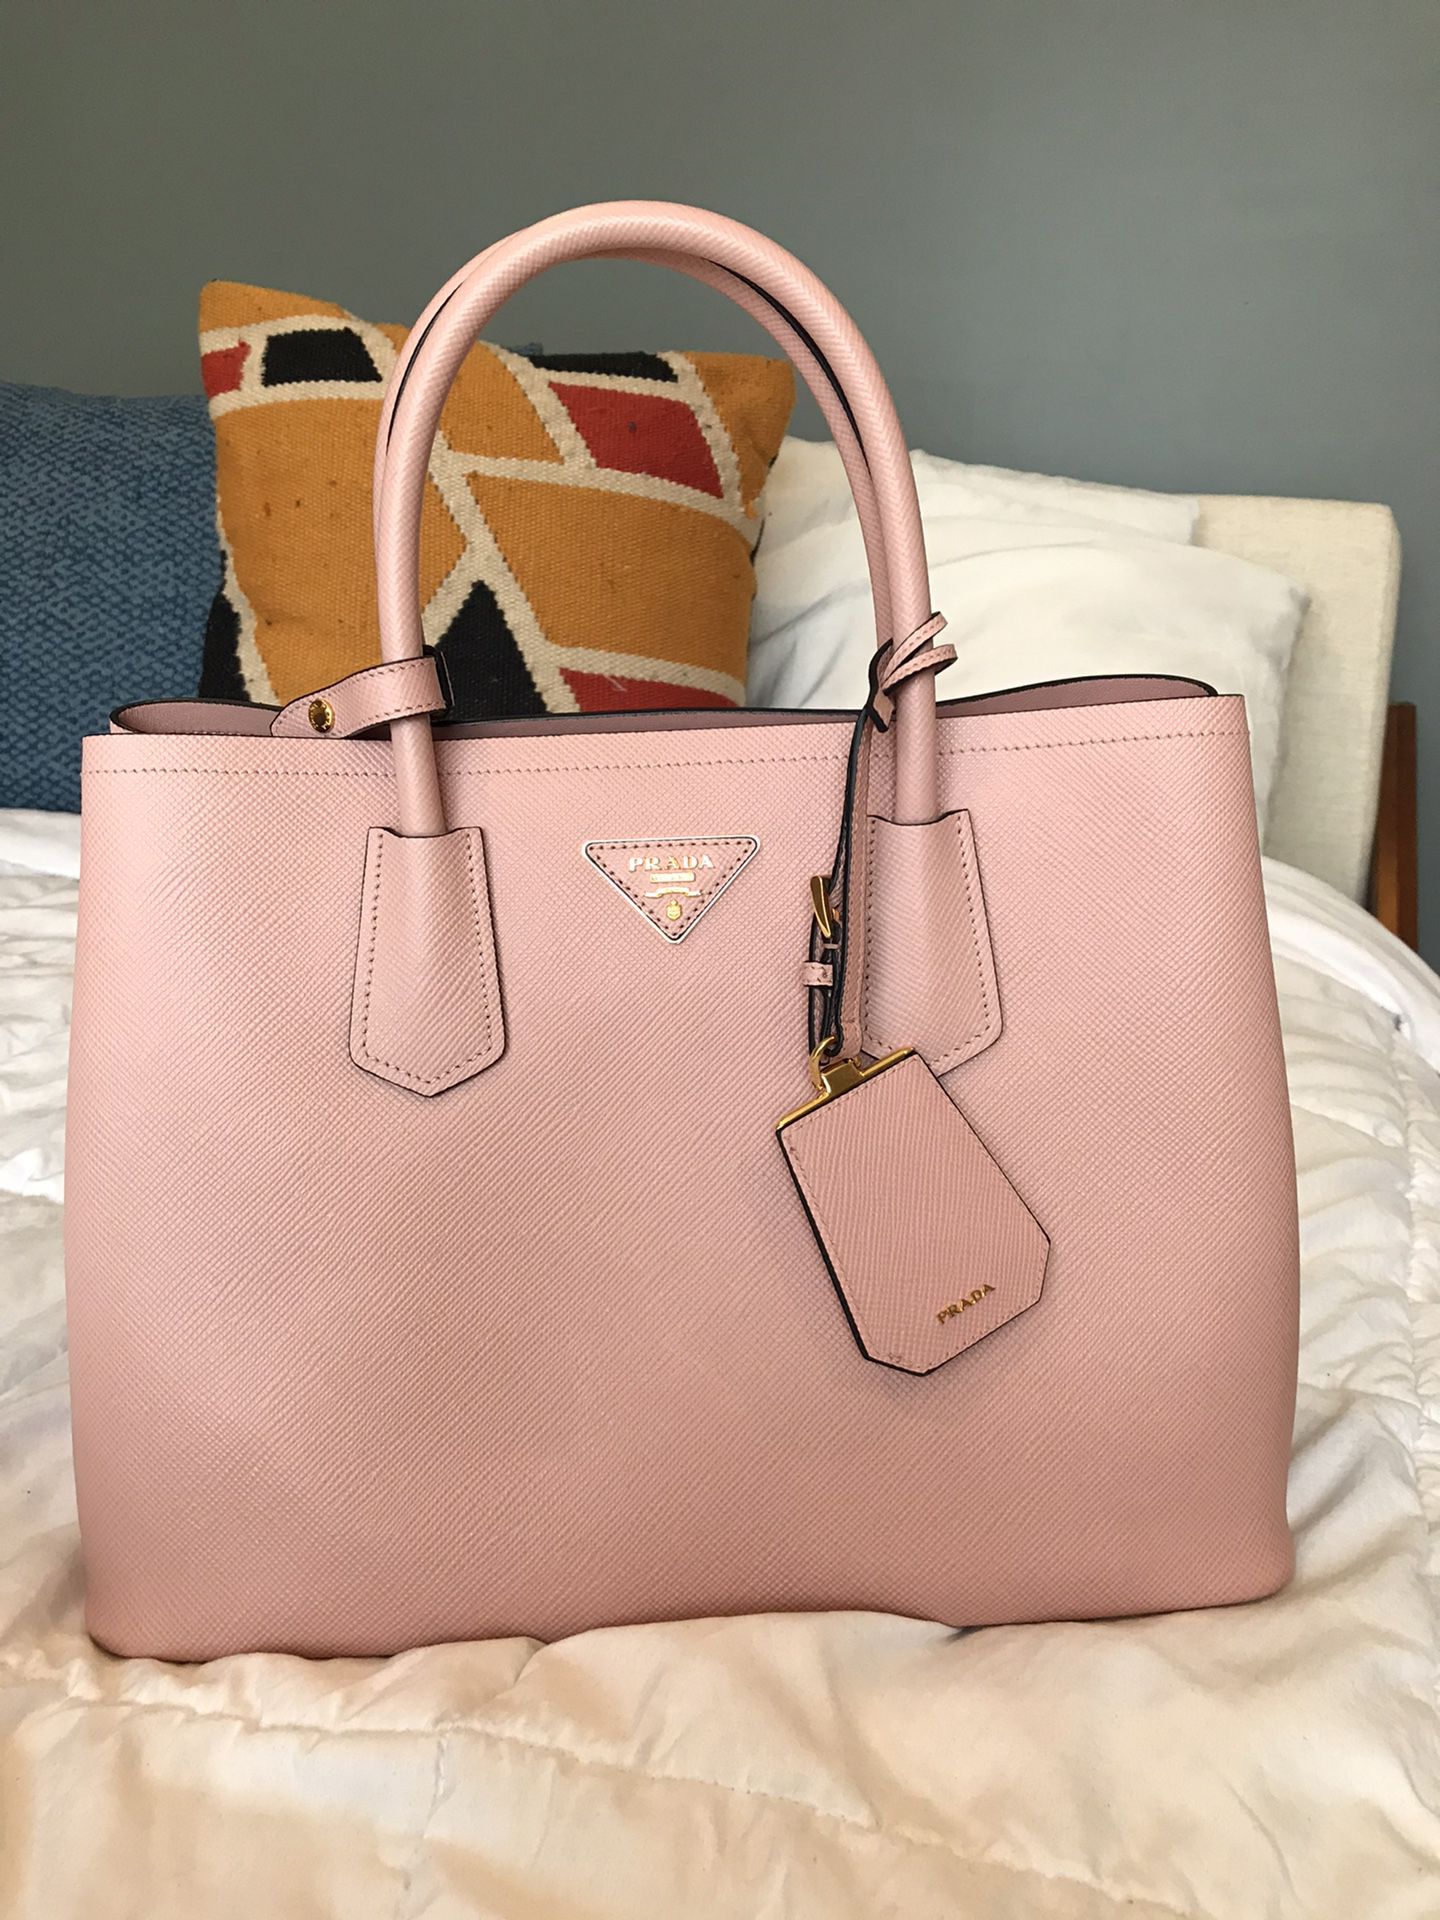 Prada Pink Saffiano Cuir Leather Medium Double Handle Tote For